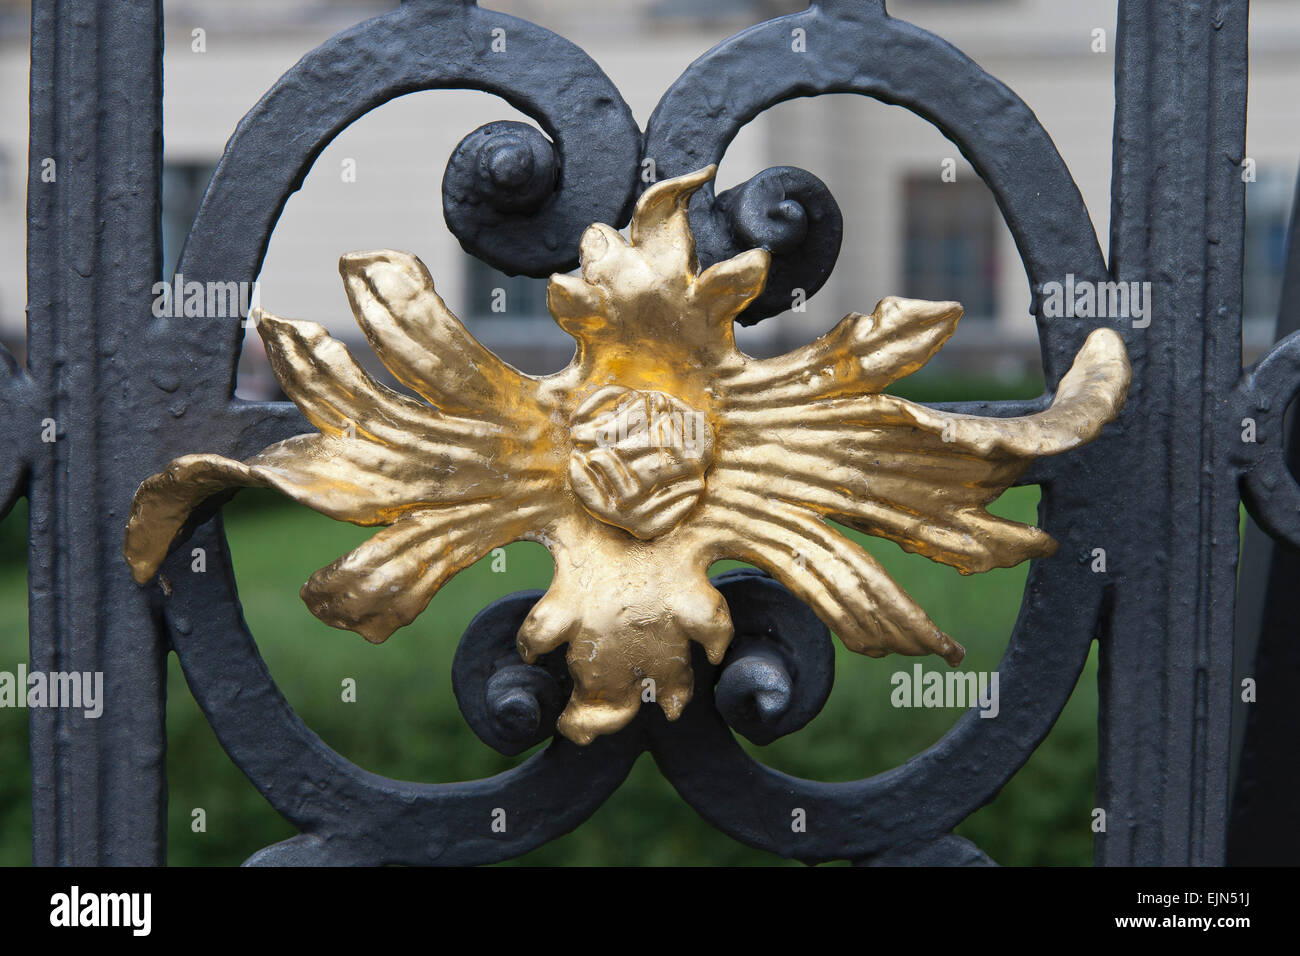 Close-up on golden ornament on a gate made of cast iron Stock Photo